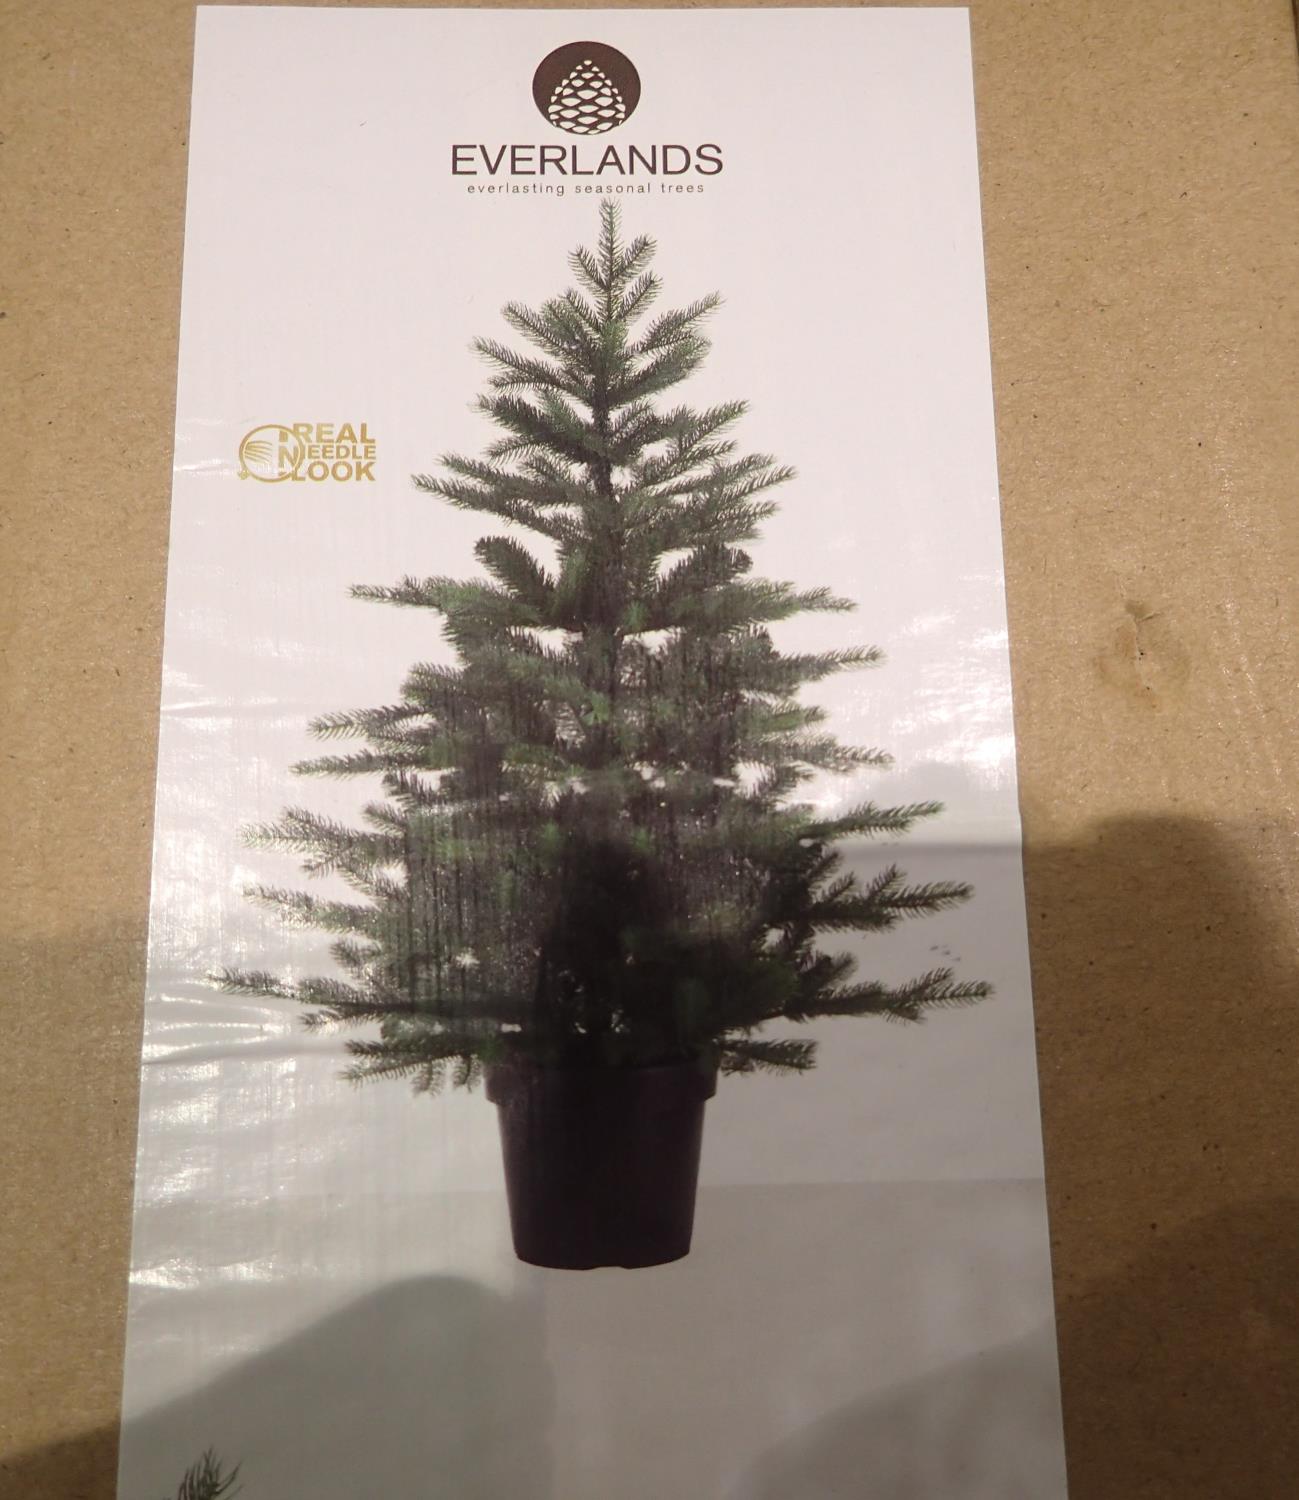 New unused 2ft Christmas tree. Not available for in-house P&P